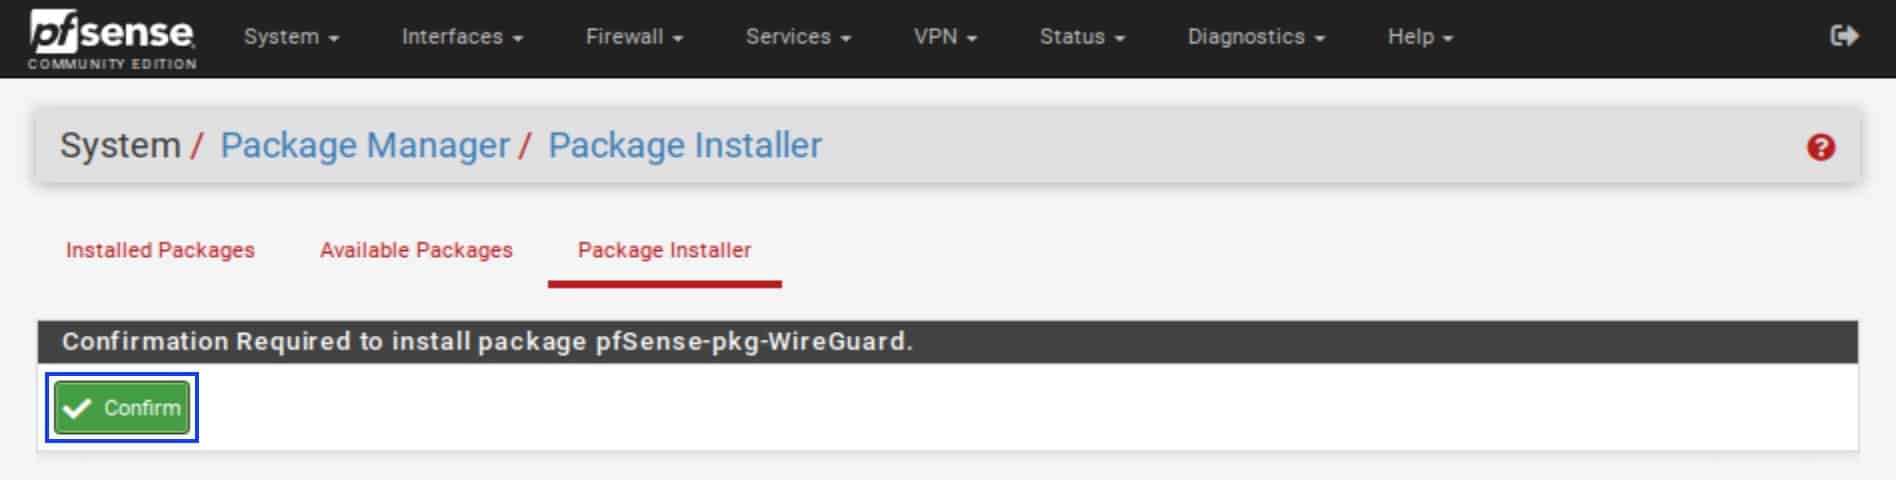 pfSense_WireGuard - Package Manager 4